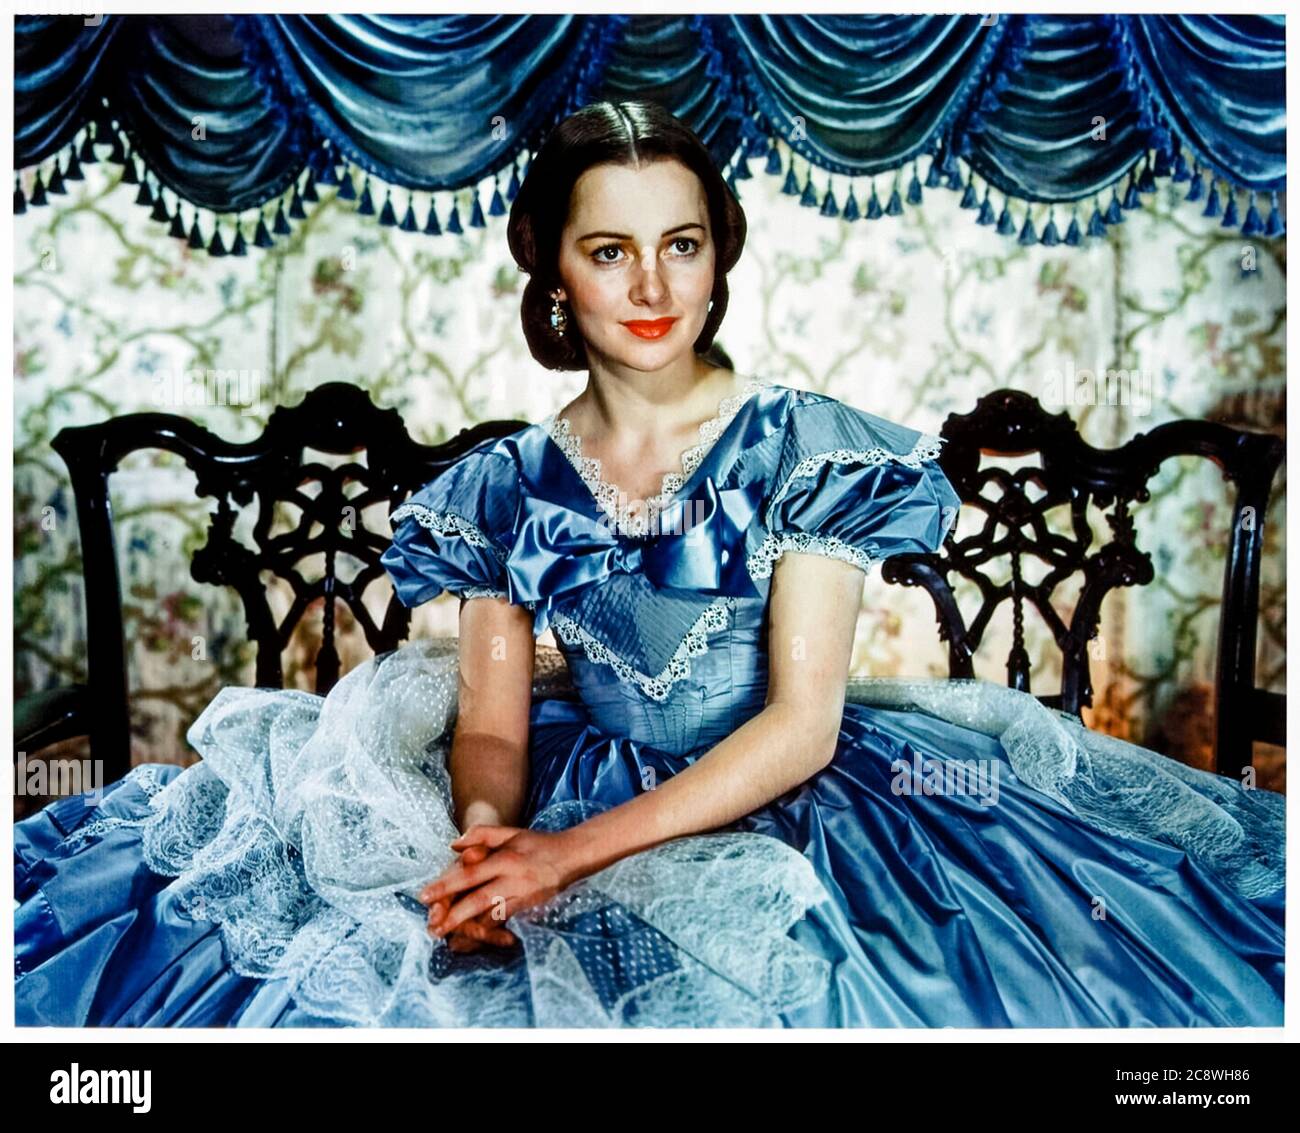 Olivia de Havilland (1916-2020) playing Melanie Hamilton in Gone with the Wind (1939) an epic historical romance film adapted from Margaret Mitchell's 1936 novel and directed by Victor Fleming and George Cukor. Olivia de Havilland was one of the leading movie stars during the golden age of Classical Hollywood and appeared in 49 feature films before retiring in 1988. Stock Photo